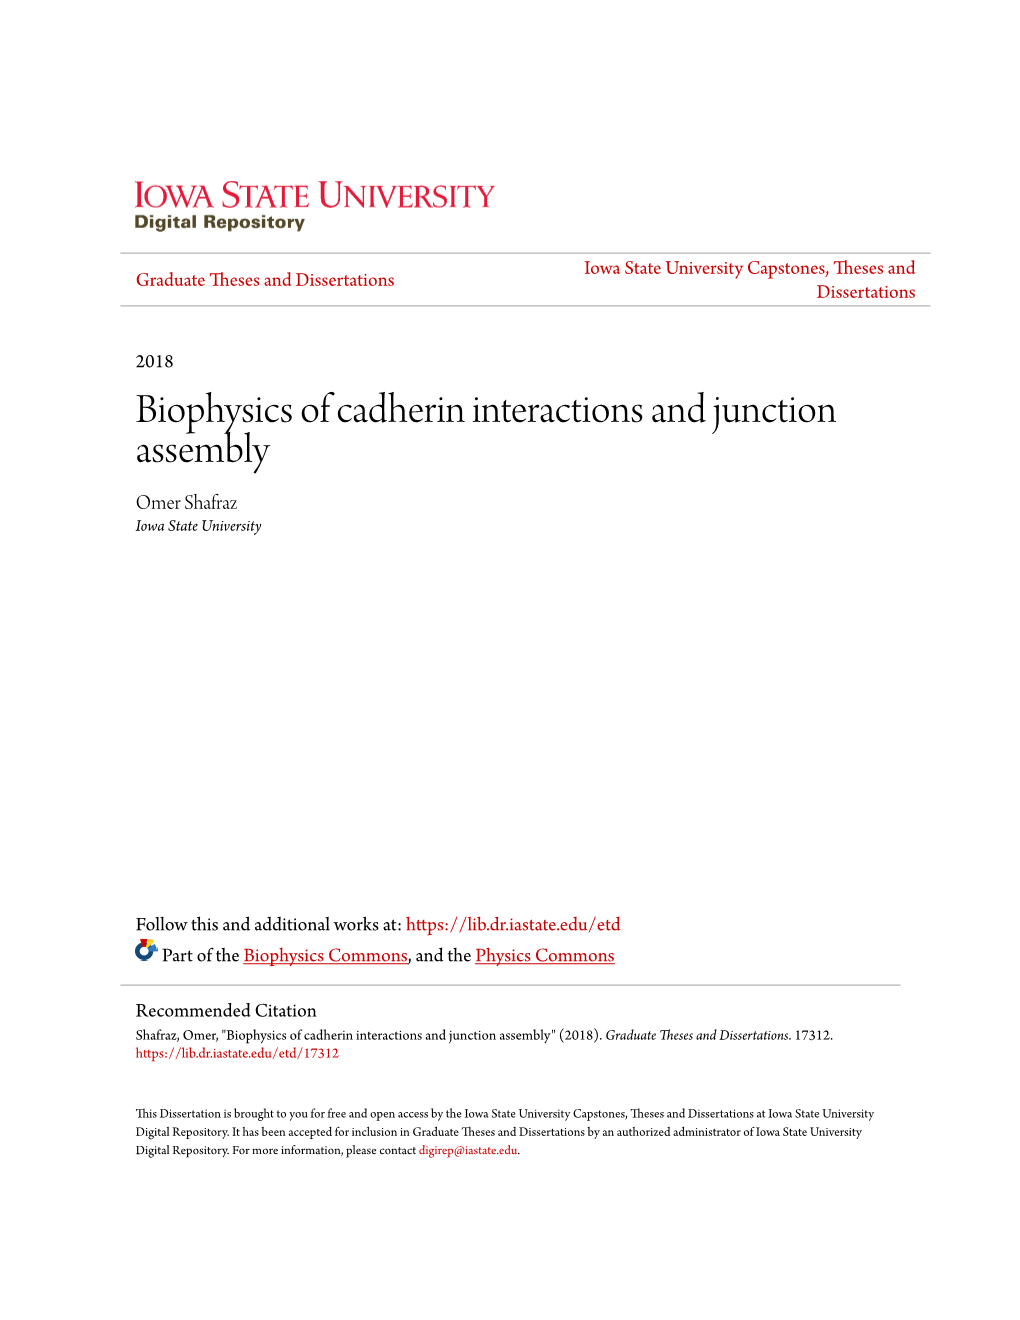 Biophysics of Cadherin Interactions and Junction Assembly Omer Shafraz Iowa State University